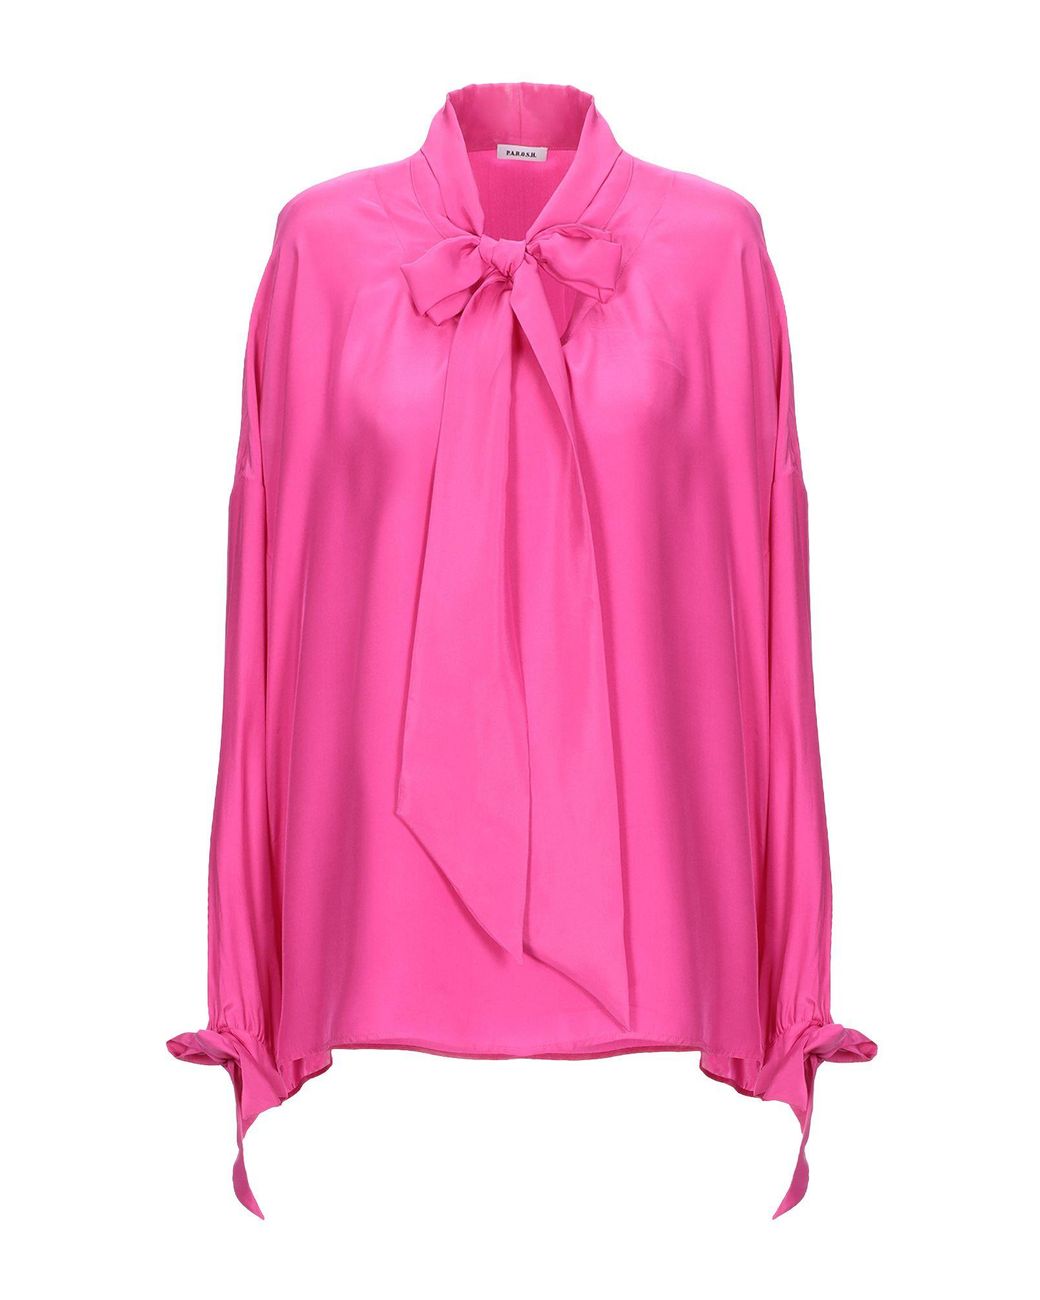 P.A.R.O.S.H. Satin Blouse in Fuchsia (Pink) - Lyst